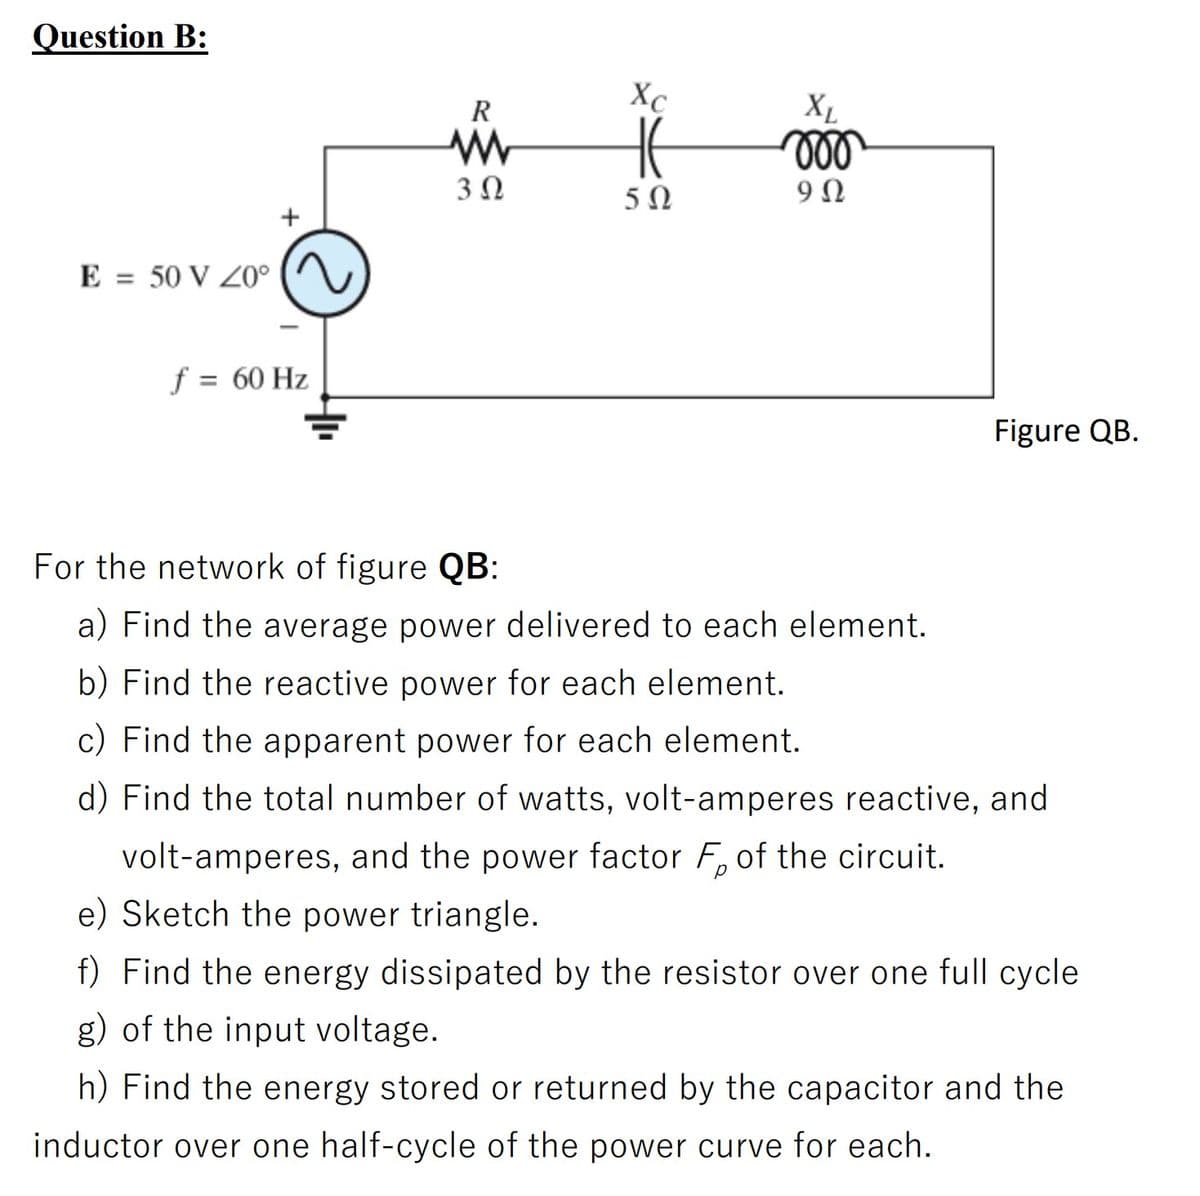 Question B:
R
Xc
XL
3Ω
5Ω
9Ω
+
E = 50 V Z0°
f = 60 Hz
Figure QB.
For the network of figure QB:
a) Find the average power delivered to each element.
b) Find the reactive power for each element.
c) Find the apparent power for each element.
d) Find the total number of watts, volt-amperes reactive, and
volt-amperes, and the power factor F, of the circuit.
e) Sketch the power triangle.
f) Find the energy dissipated by the resistor over one full cycle
g) of the input voltage.
h) Find the energy stored or returned by the capacitor and the
inductor over one half-cycle of the power curve for each.
